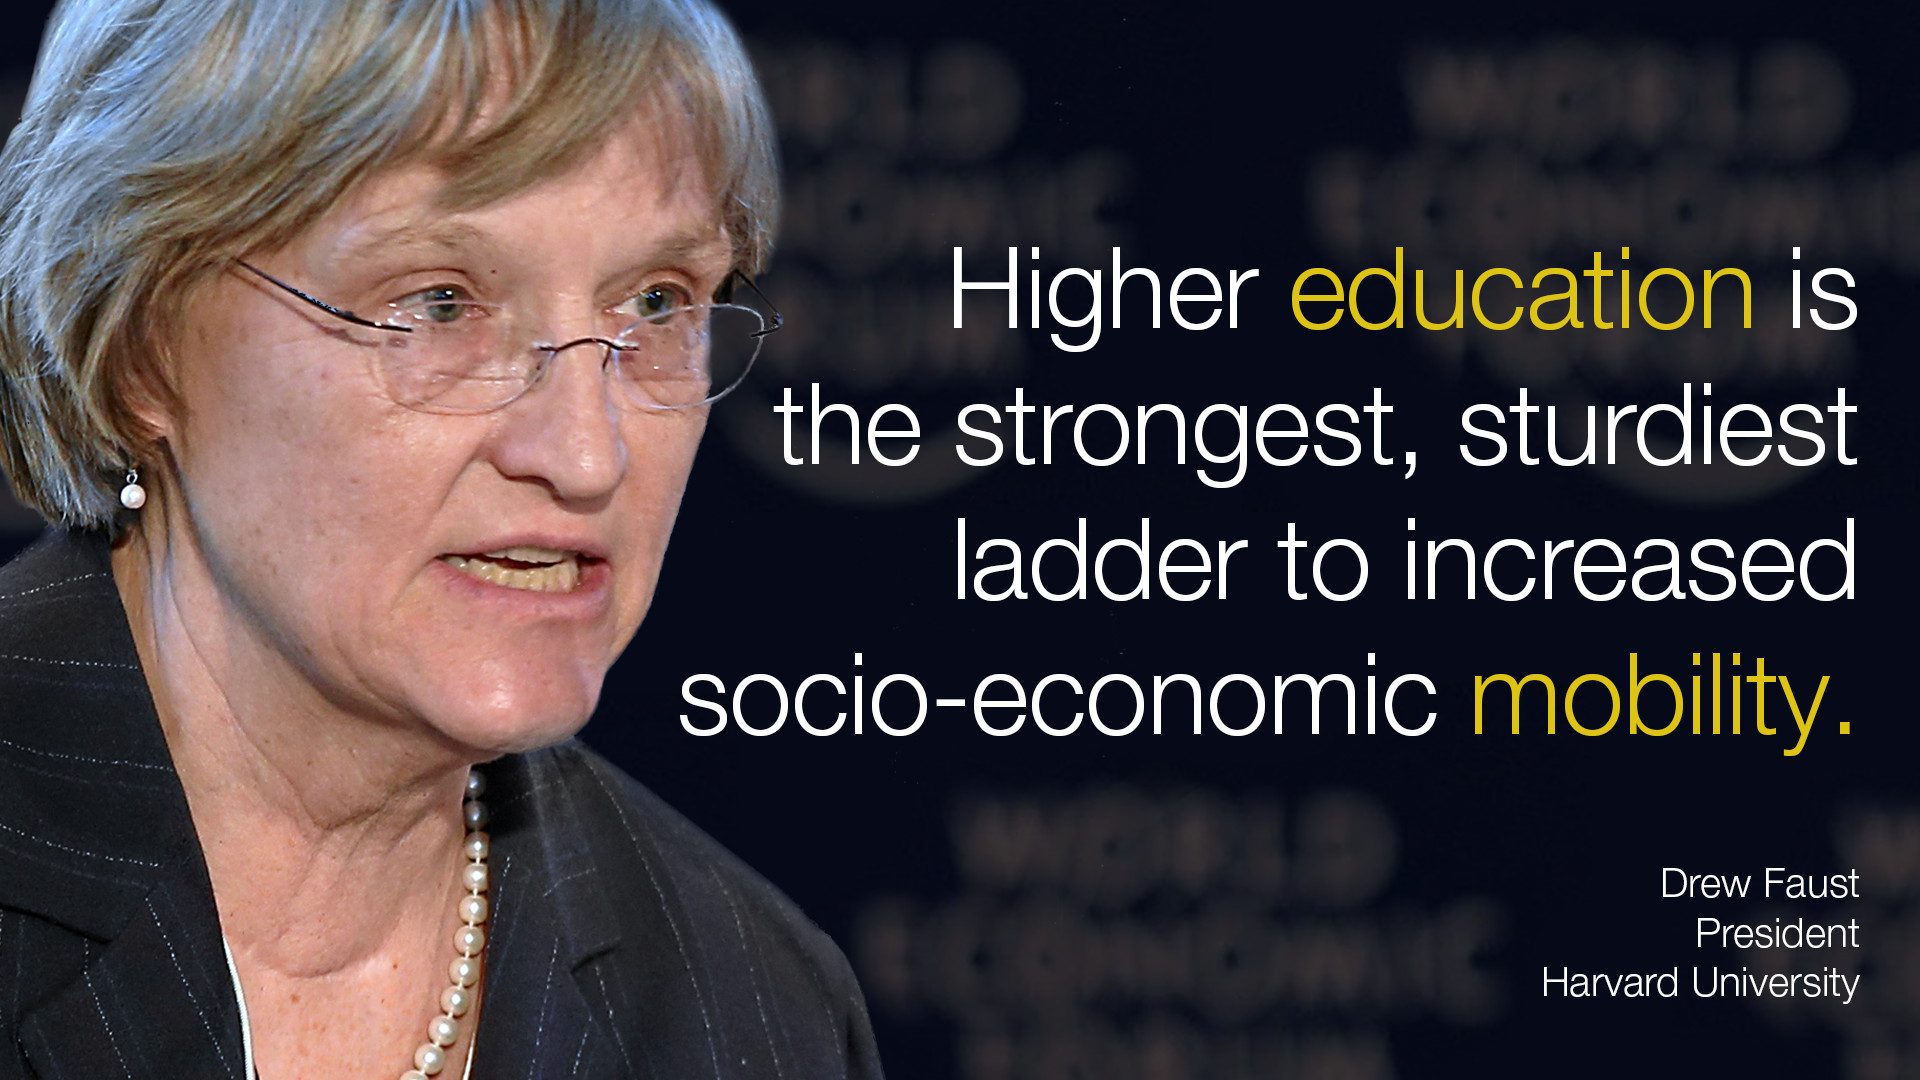 Quote About Higher Education
 Higher education is the strongest stur st ladder to